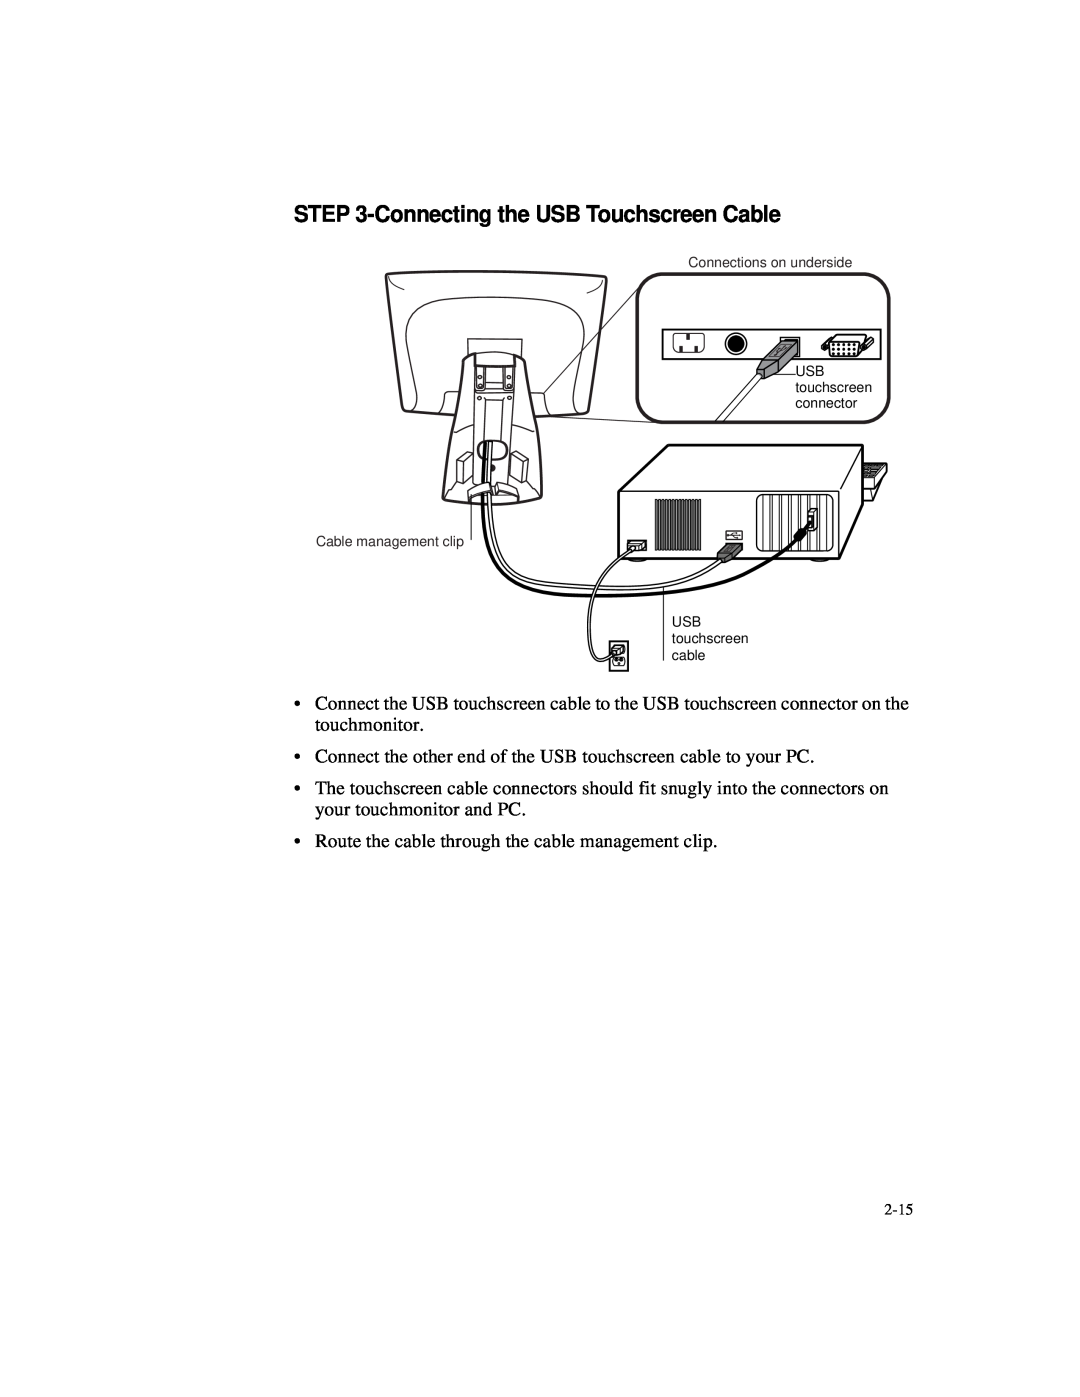 Elo TouchSystems 1525L manual Connecting the USB Touchscreen Cable, USB touchscreen connector, USB touchscreen cable 